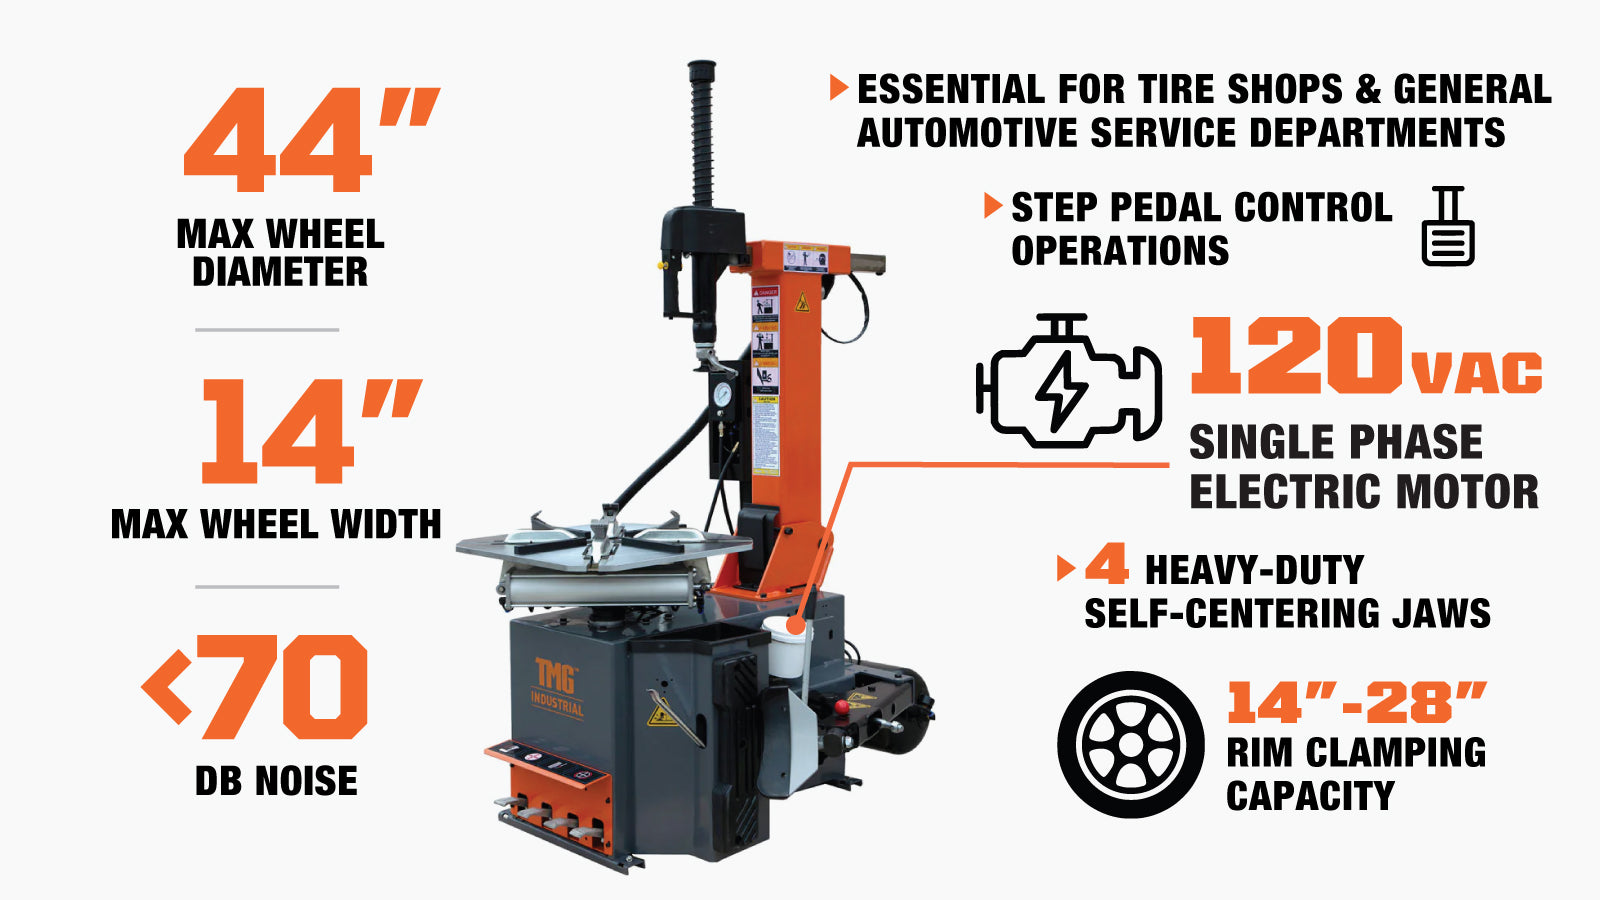 TMG Industrial Tilt-Back Semi-Automatic Tire Changer, Bead Blaster & Air Tank, 14”-28” Rim Clamping, Step Pedal Control, 2 HP Motor, CETL Certified For Canada/USA, TMG-TC28-description-image